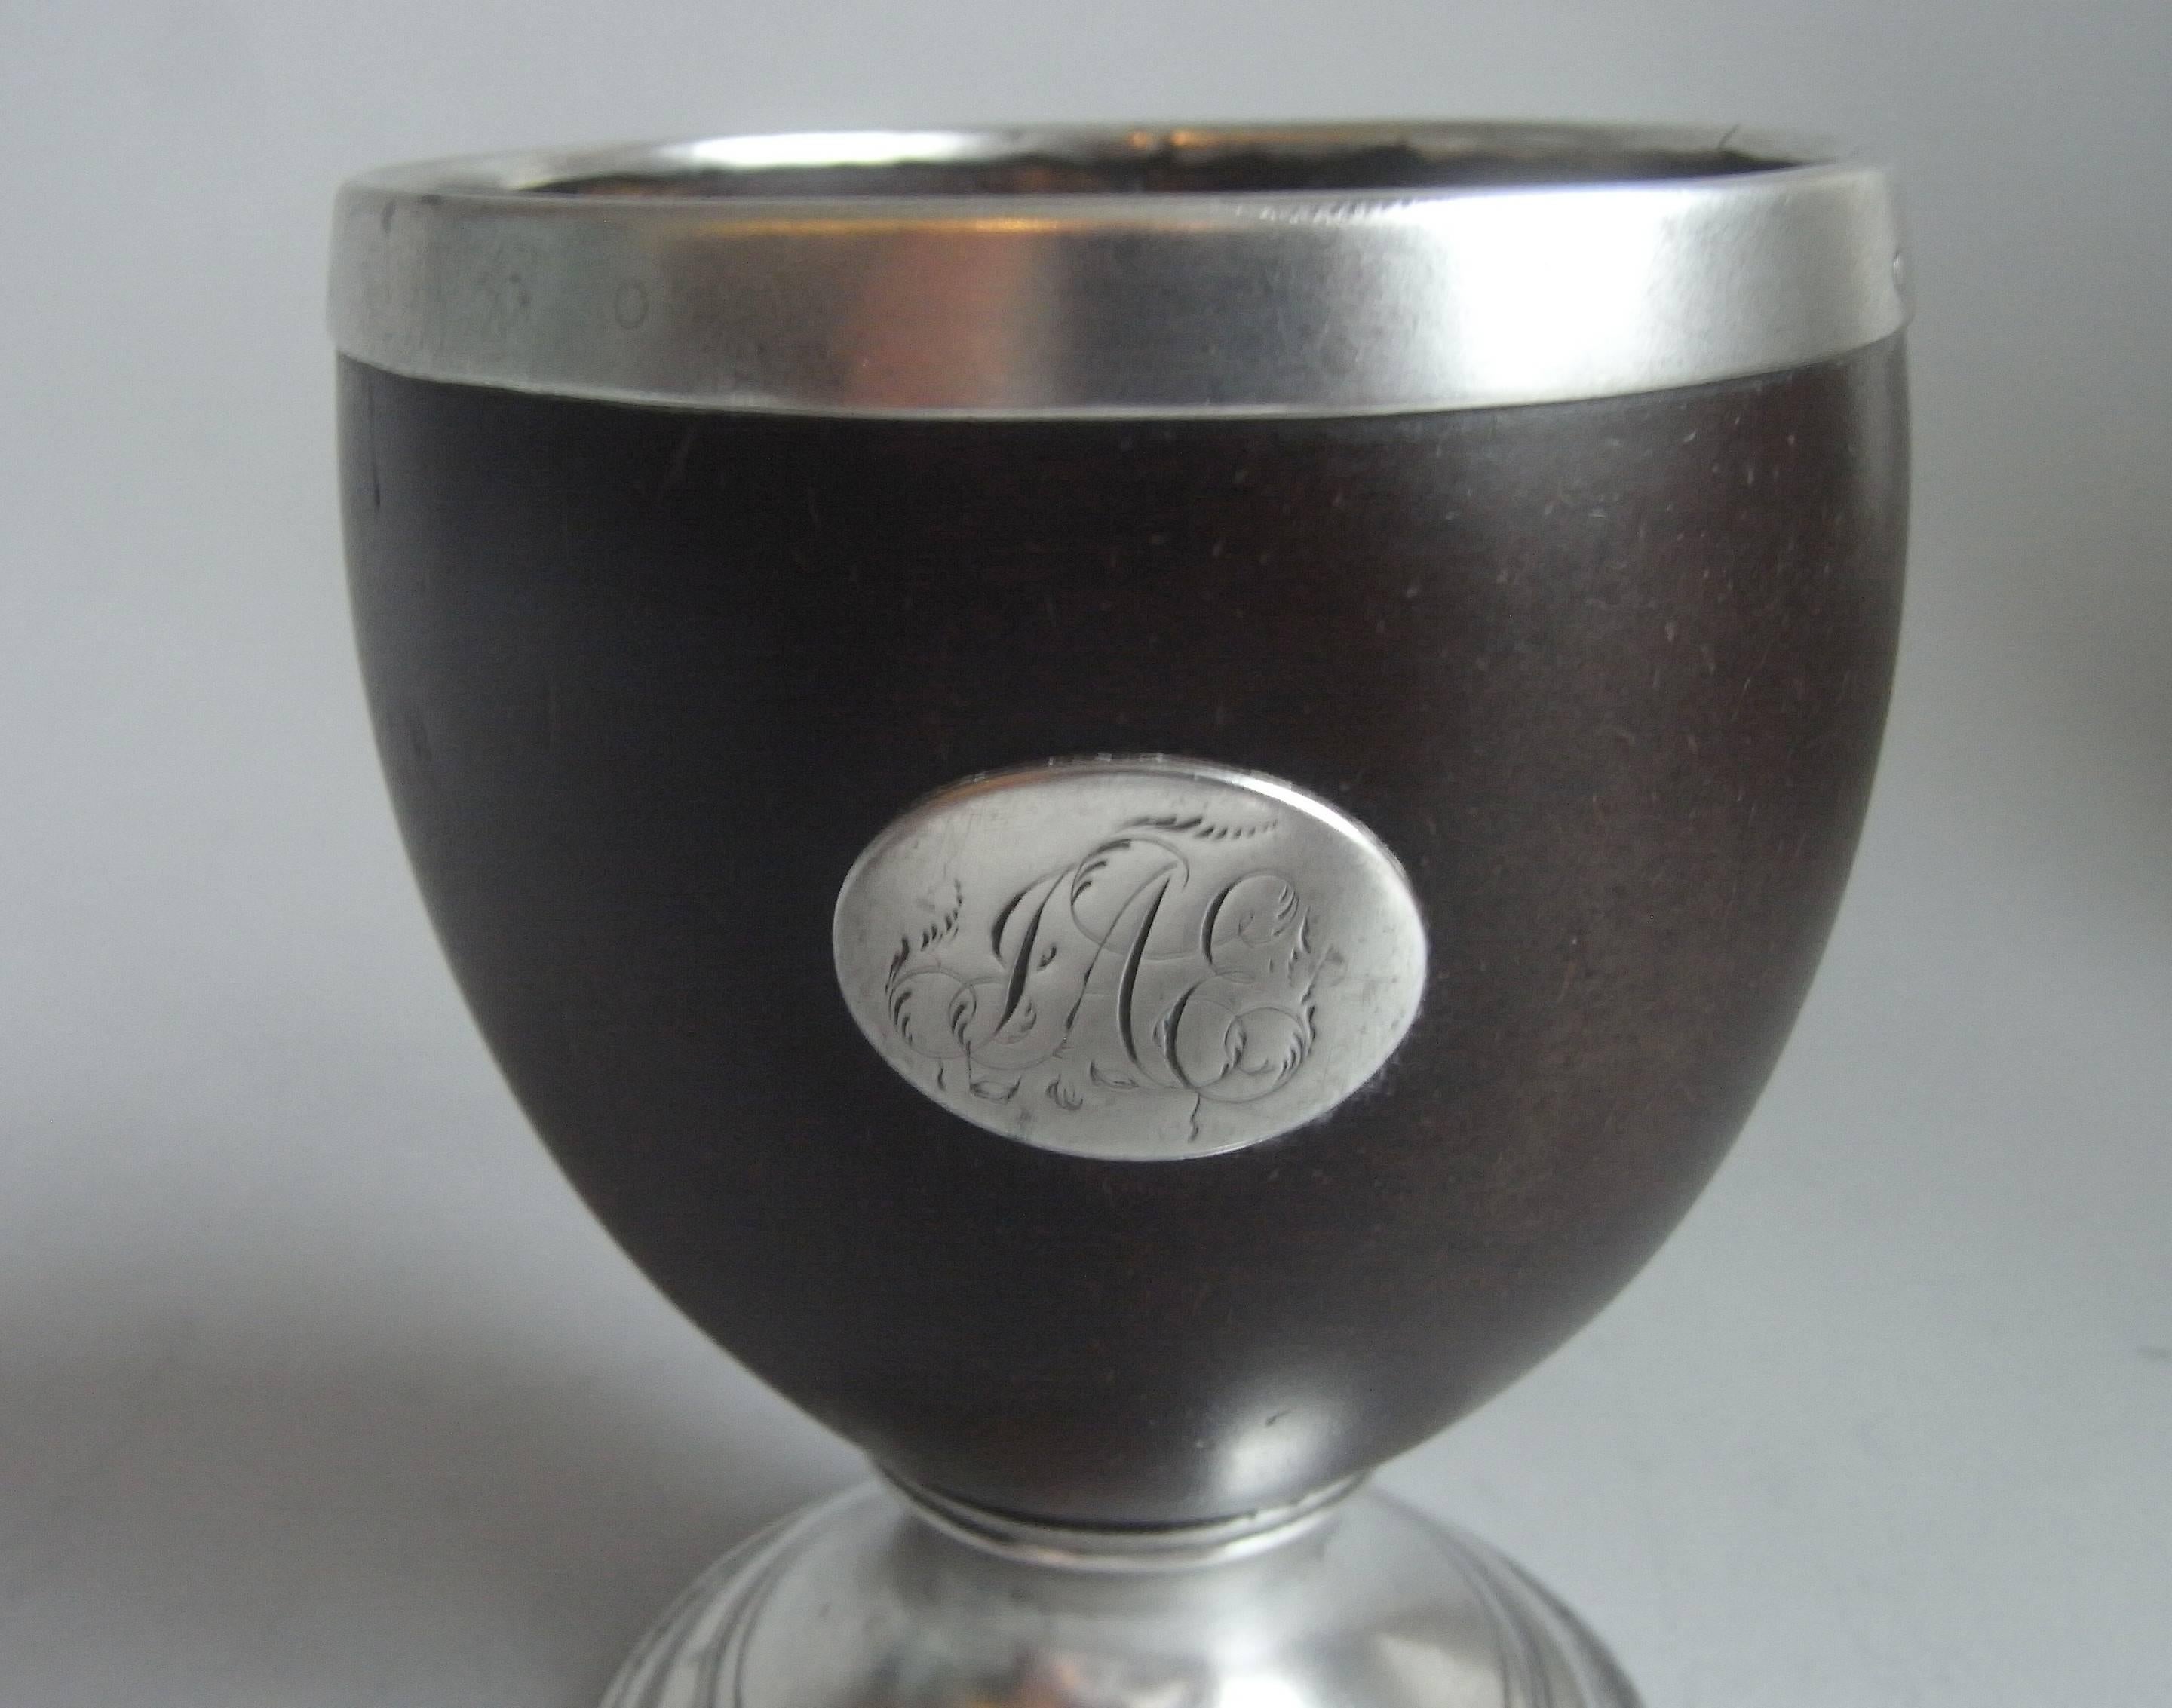 The Coconut main body stands on a stepped domed silver foot which is decorated with reeding. This example has a plain silver rim and the front also displays an oval disc cartouche engraved with a set of contemporary script initials. The coconut is